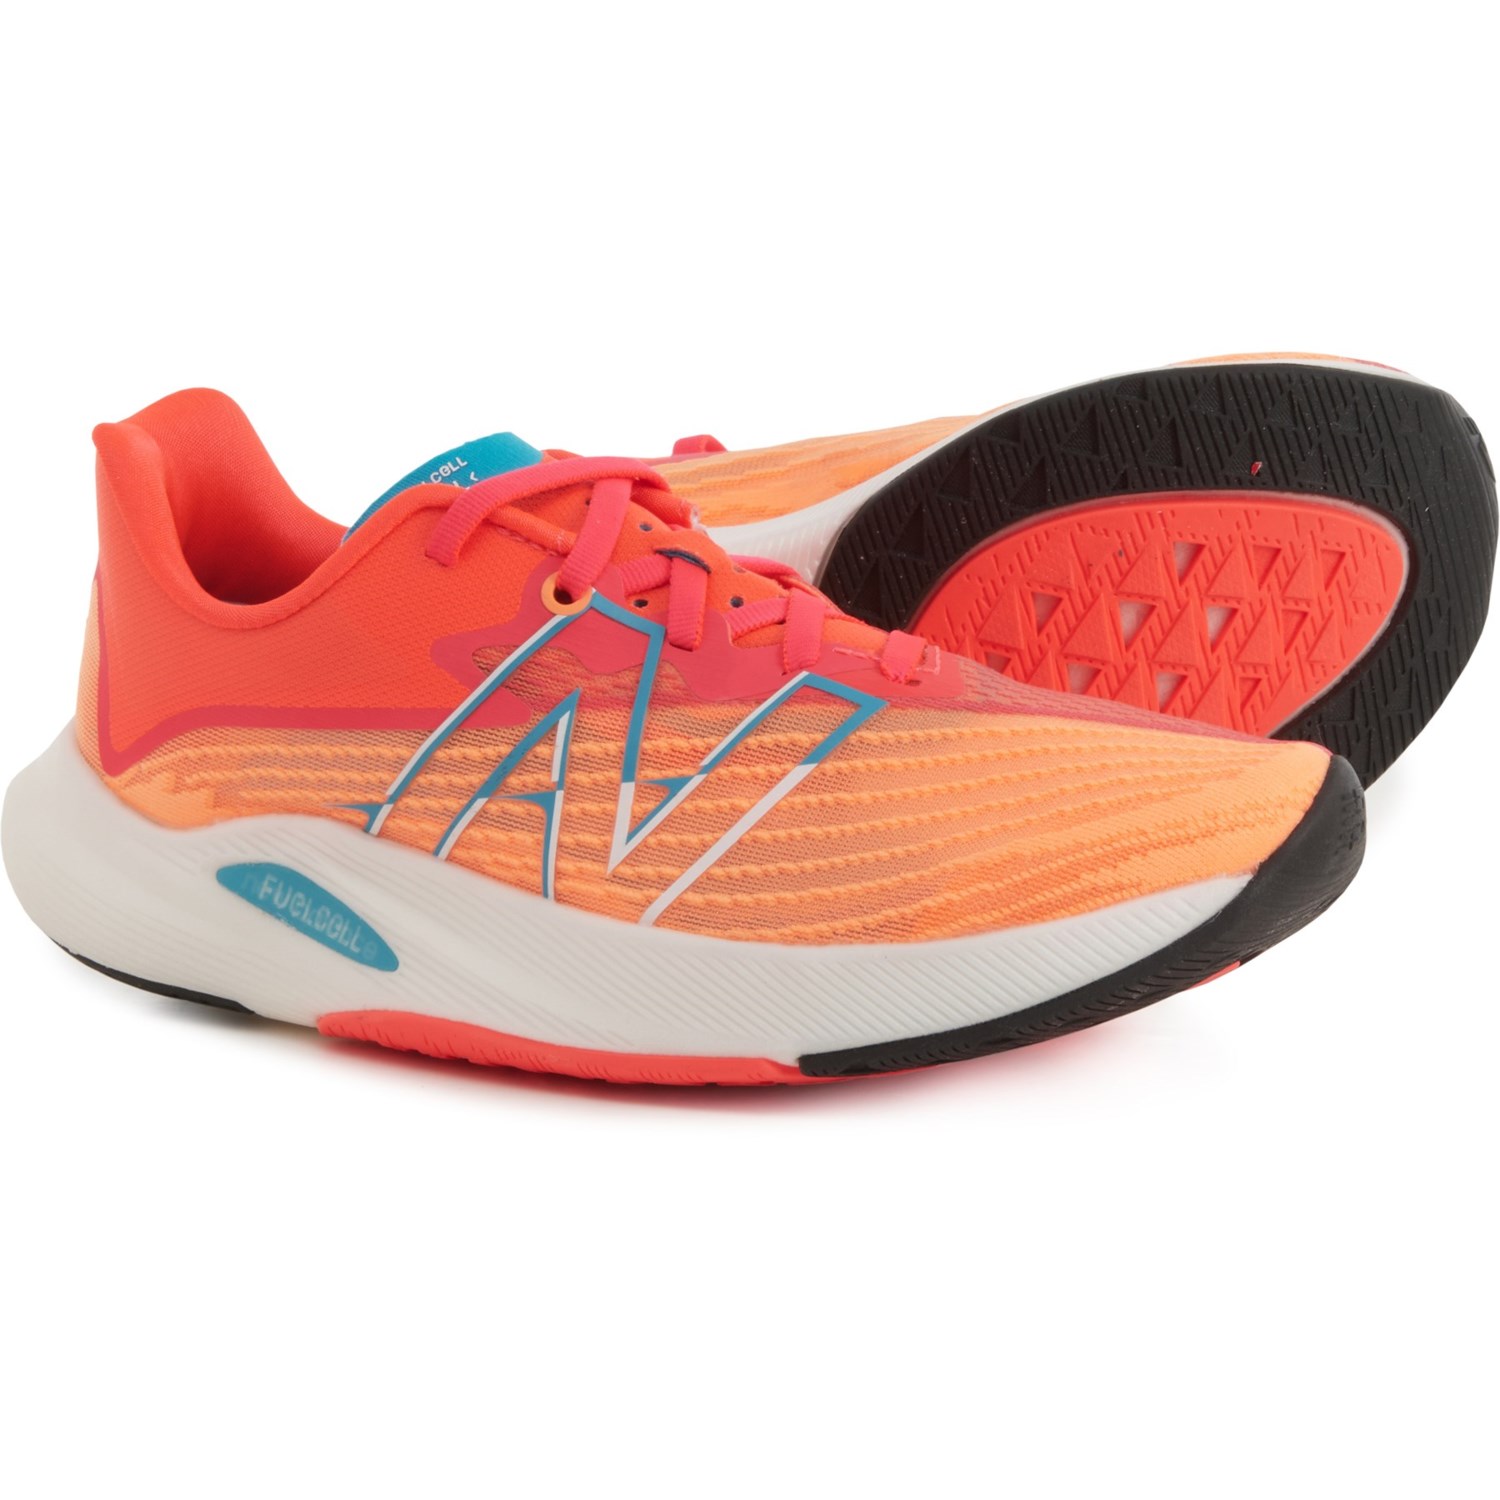 New Balance FuelCell Rebel v2 Running Shoes (For Women)